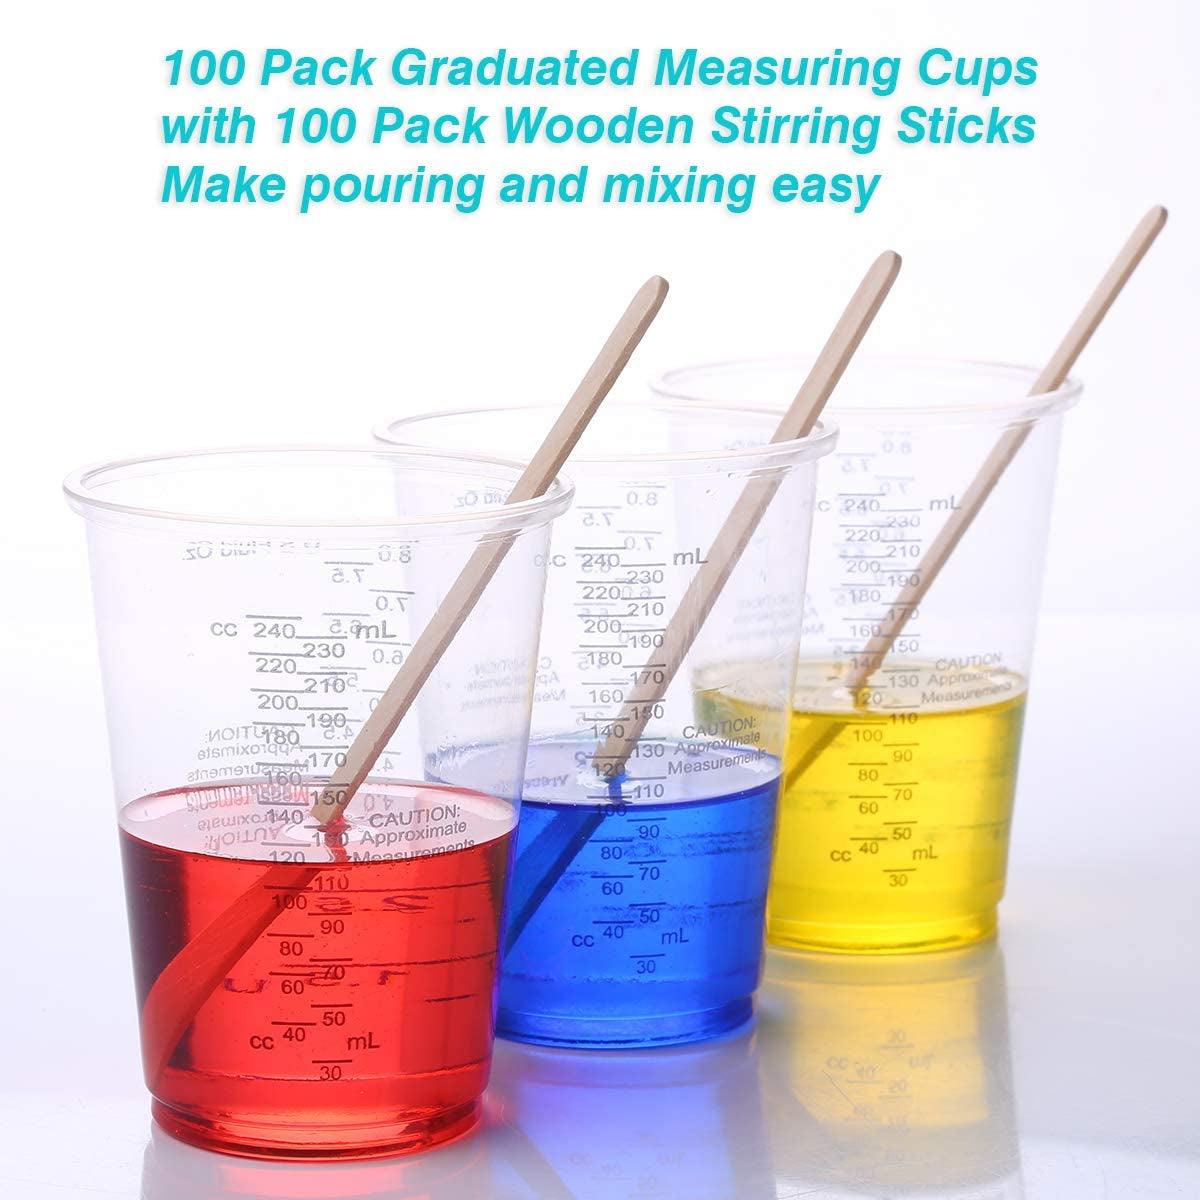 100Pcs 8Oz Graduated Clear Plastic Measuring Cups with 100Pcs Wooden Stirring Sticks for Mixing Paint, Pigments, Epoxy Resins, Resins - WoodArtSupply